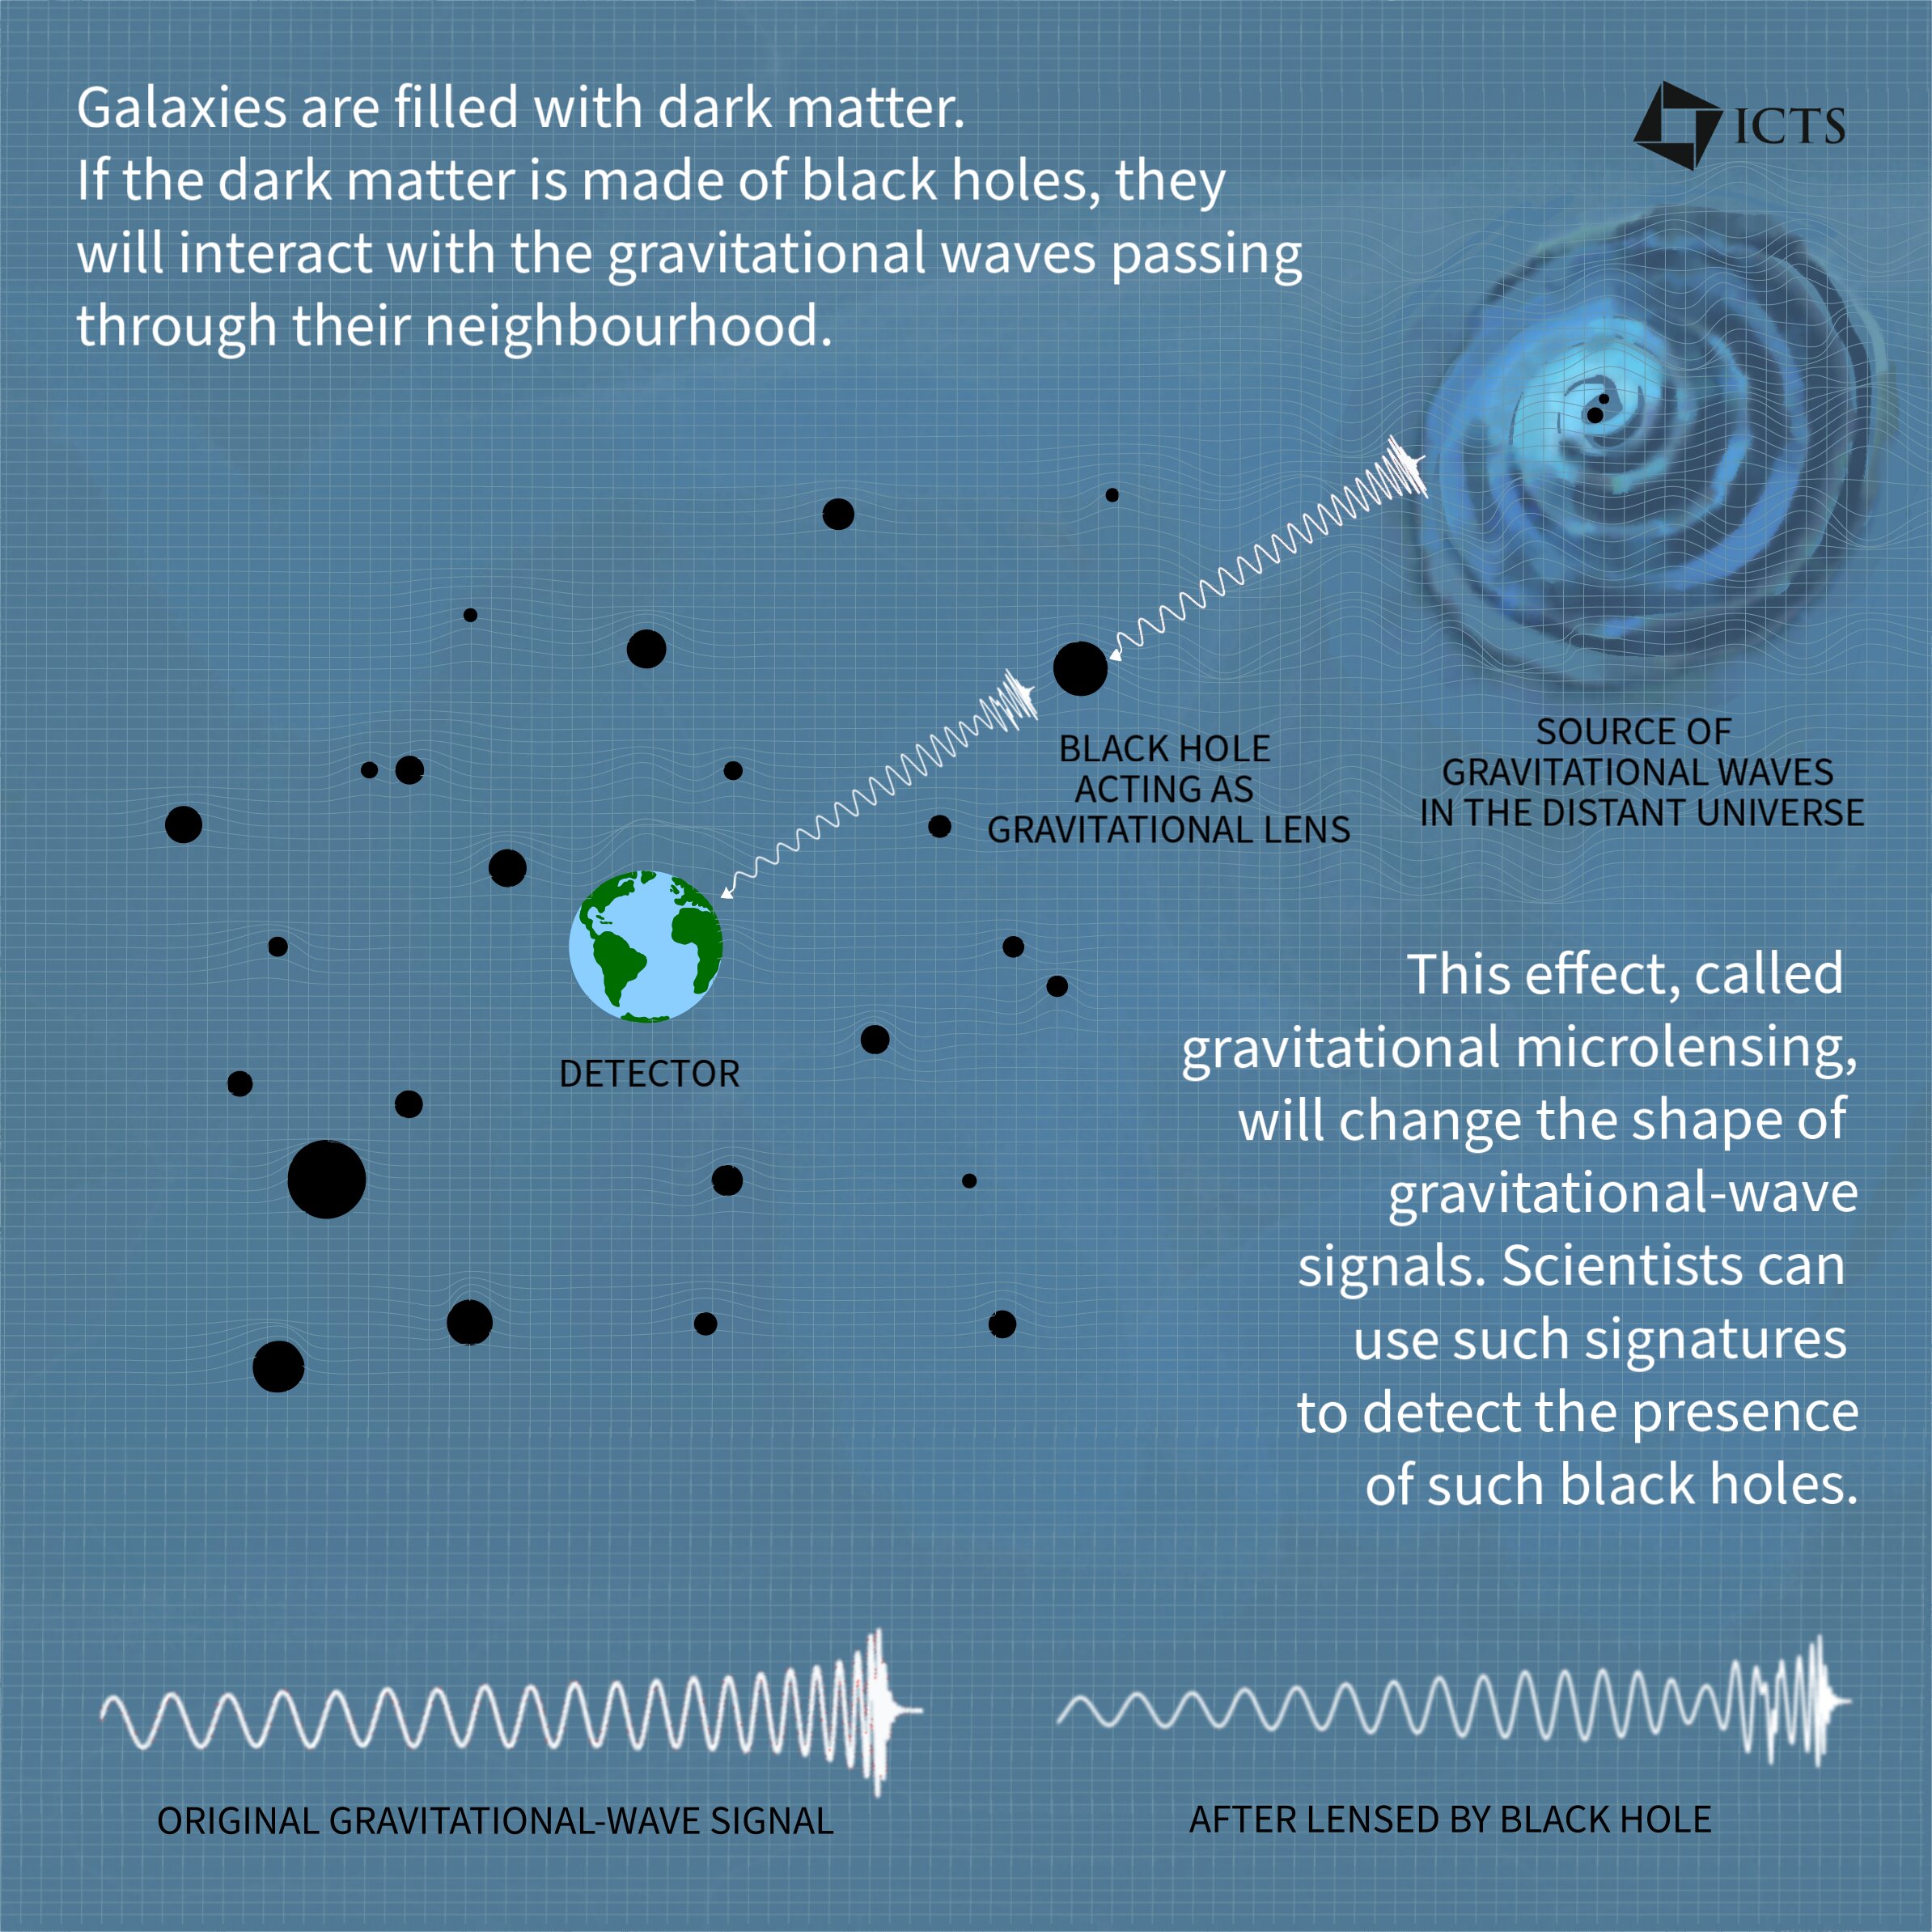 Astrophysicists set constraints on compact dark matter from gravitational wave m..